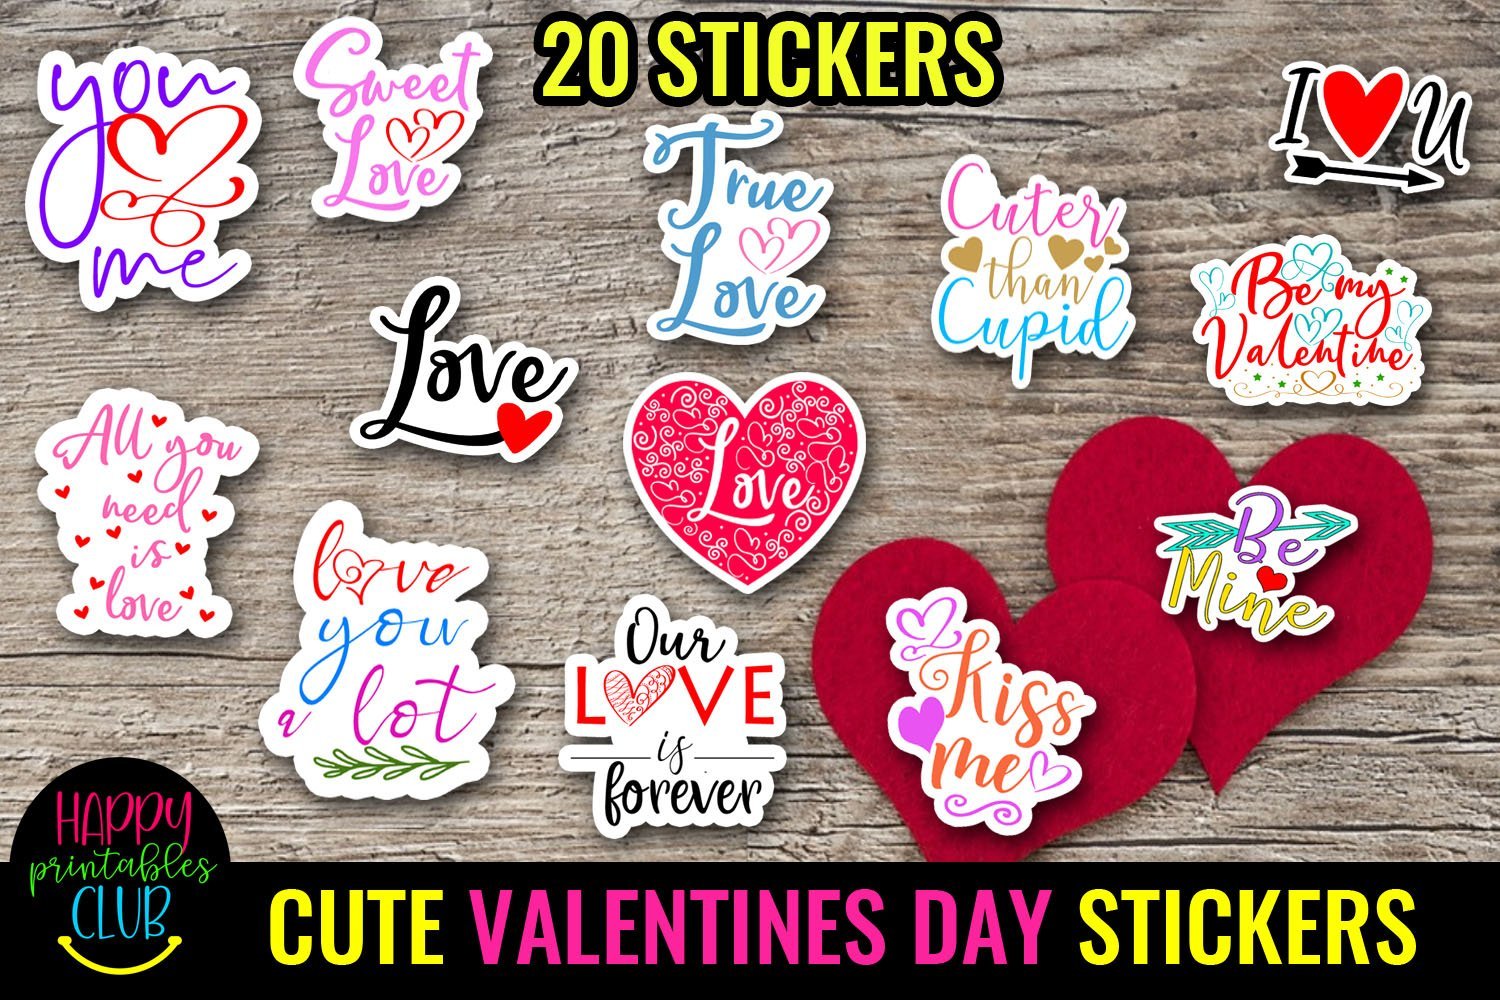 Cute Valentines Day Stickers-Love Romantic Stickers Cute - So Fontsy